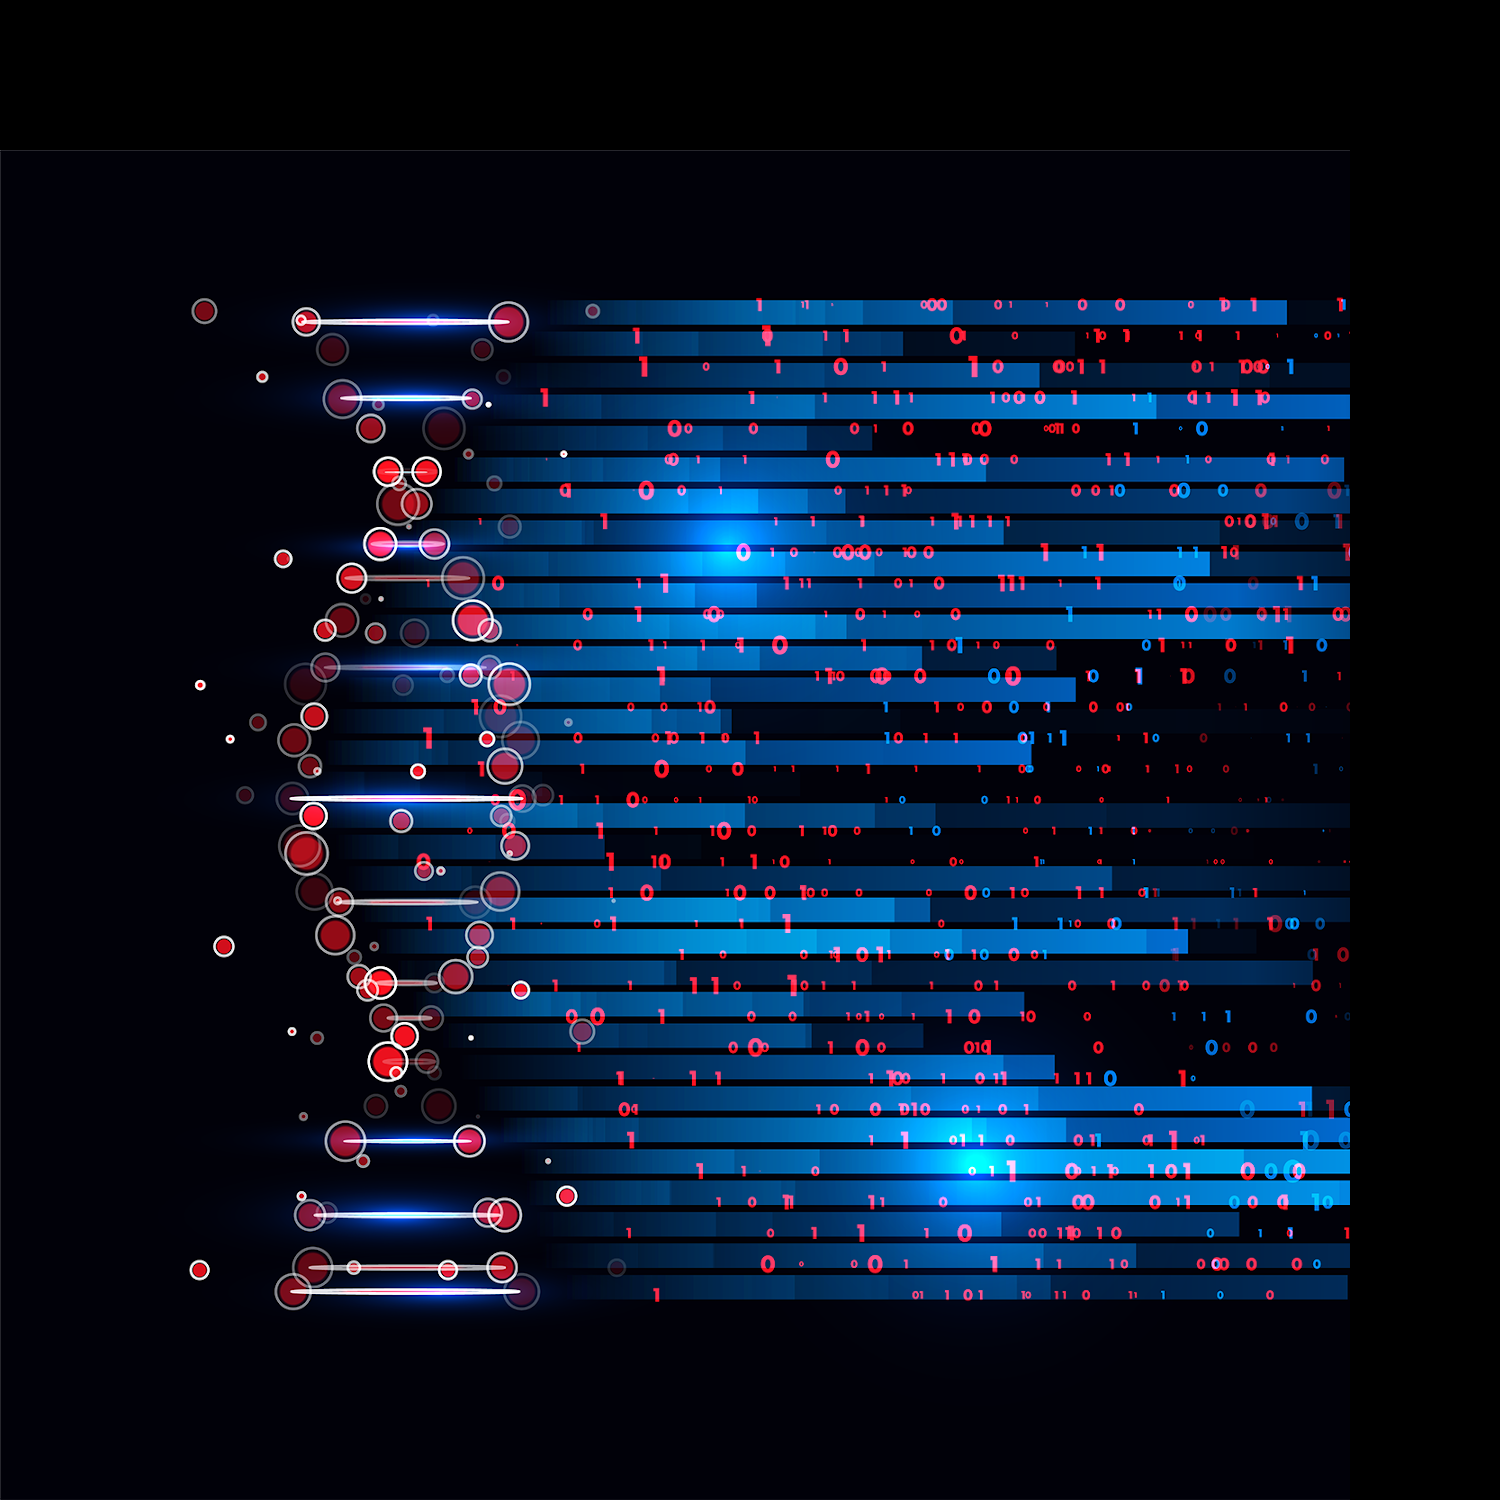 Abstract image a DNA helix translated into digital information.